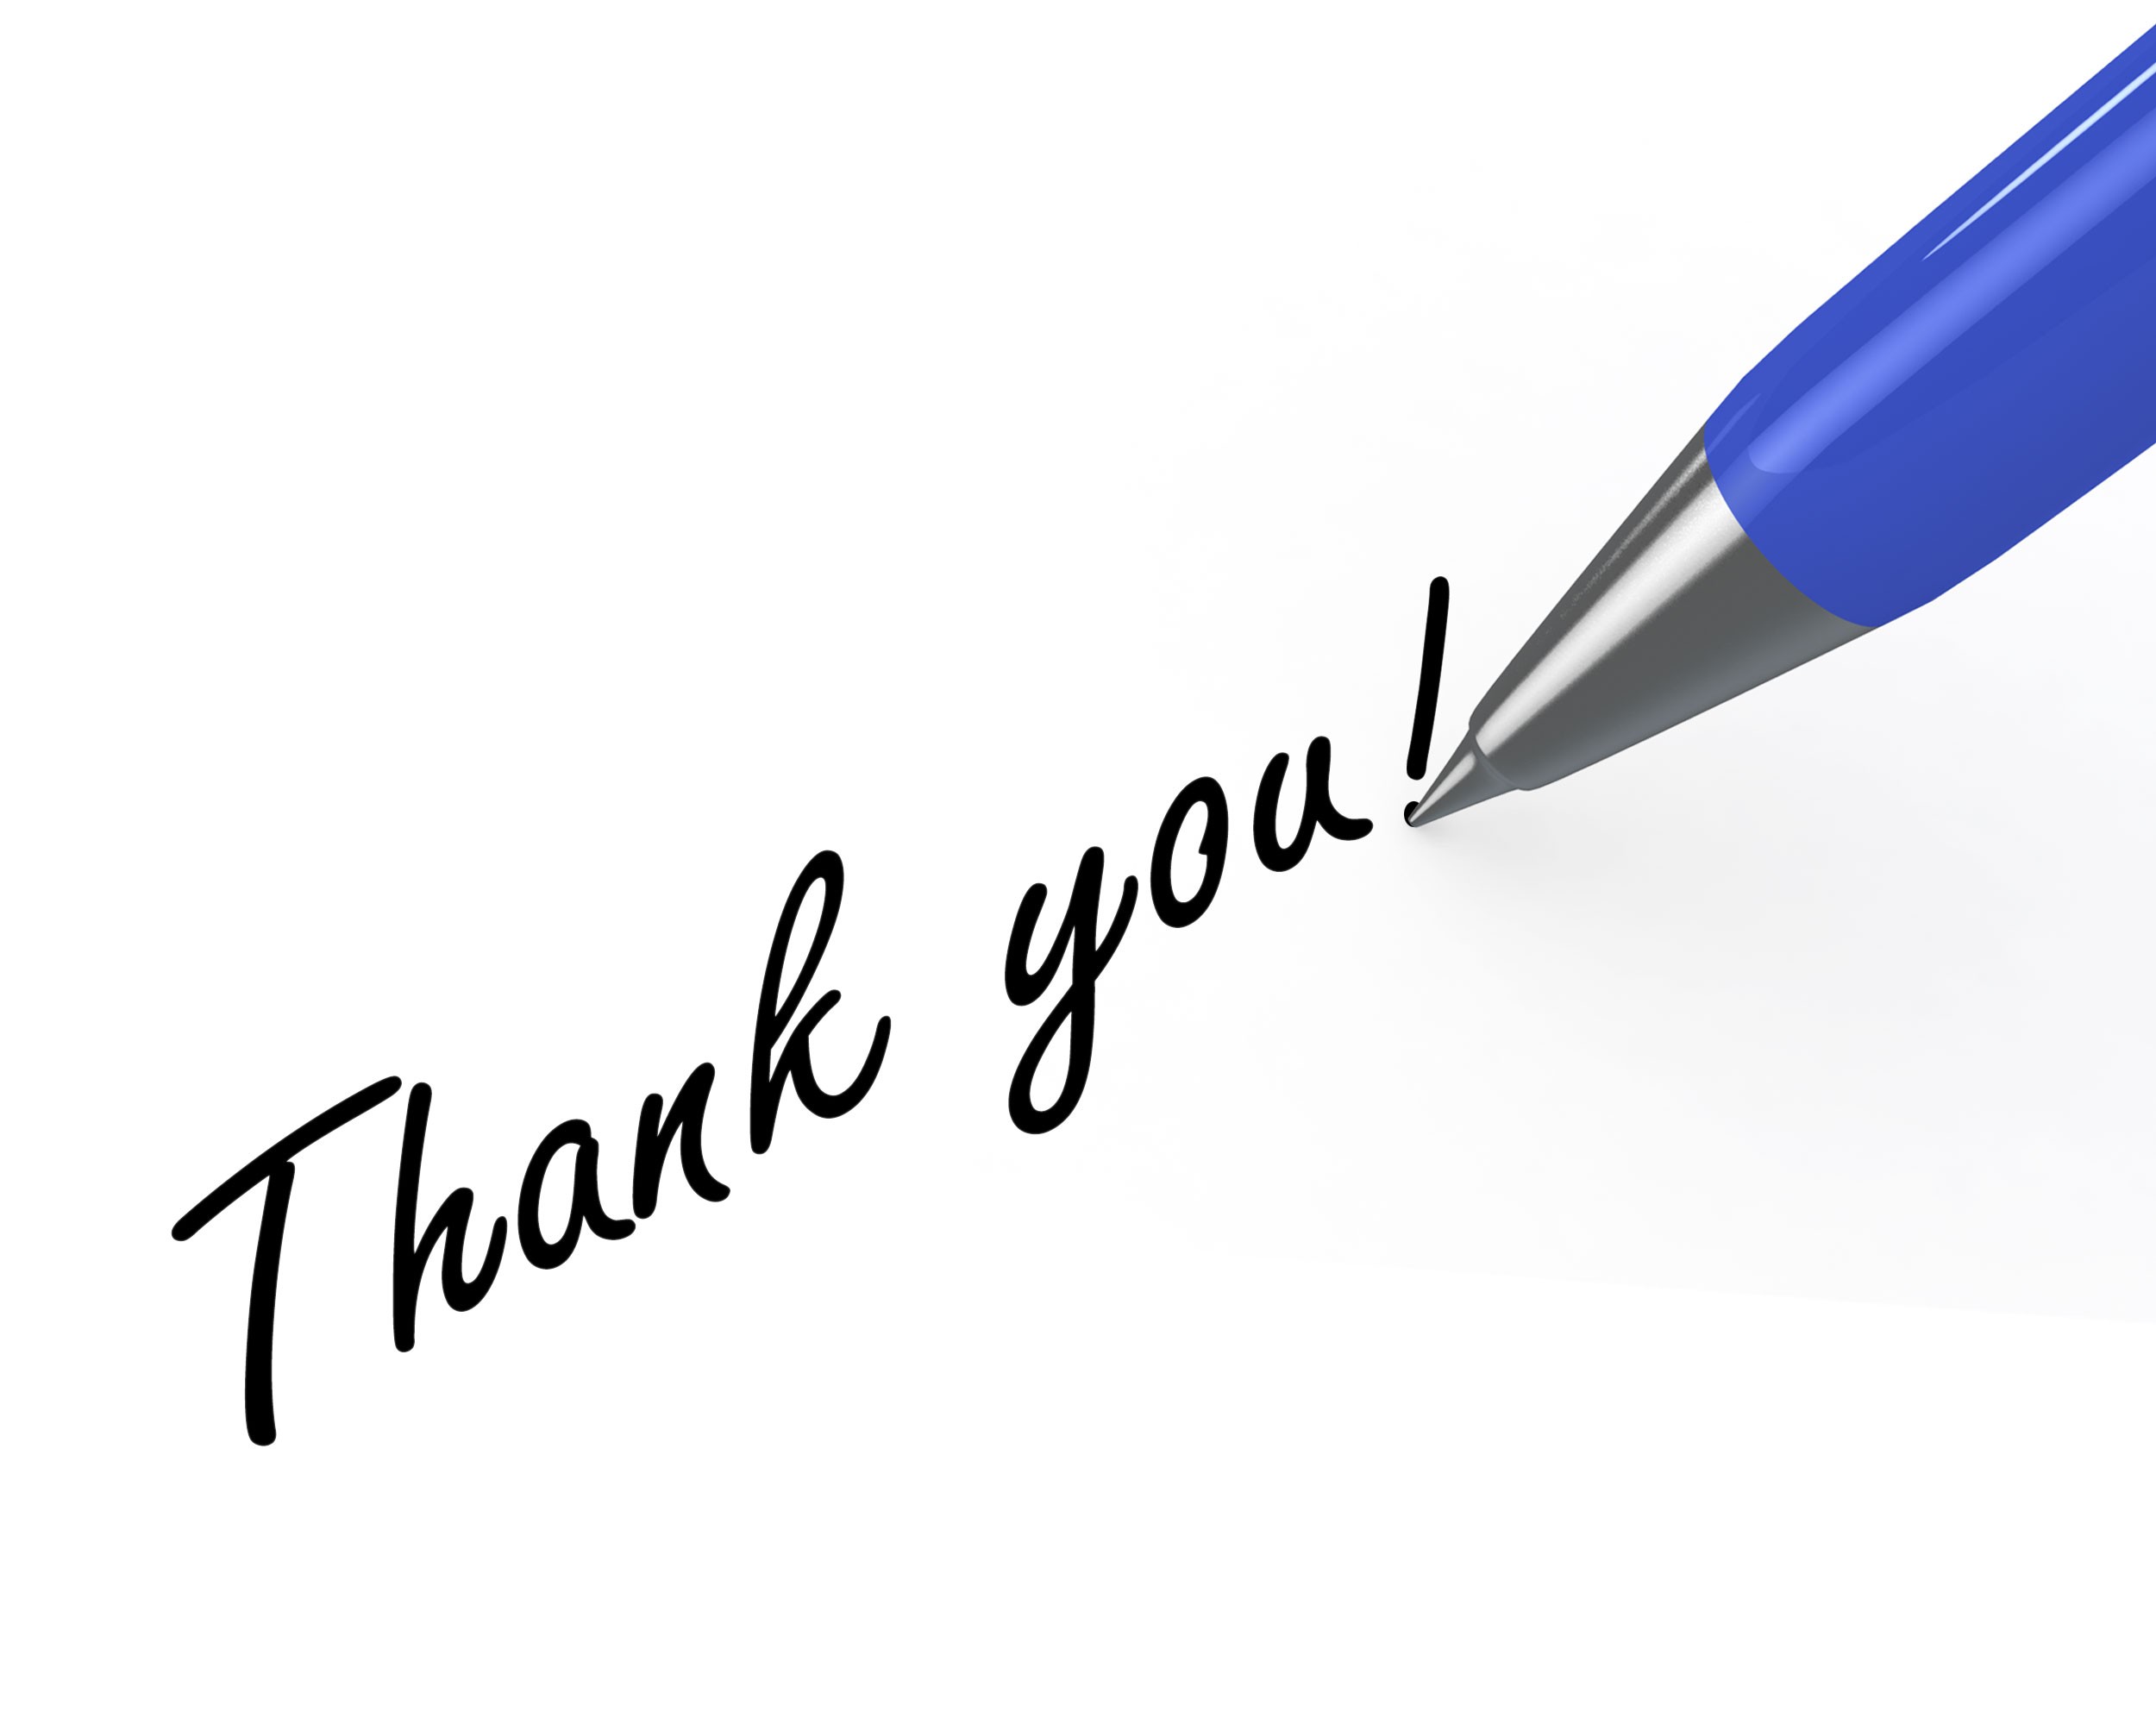 0914 Thank You Note With Blue Pen On White Background Stock Photo